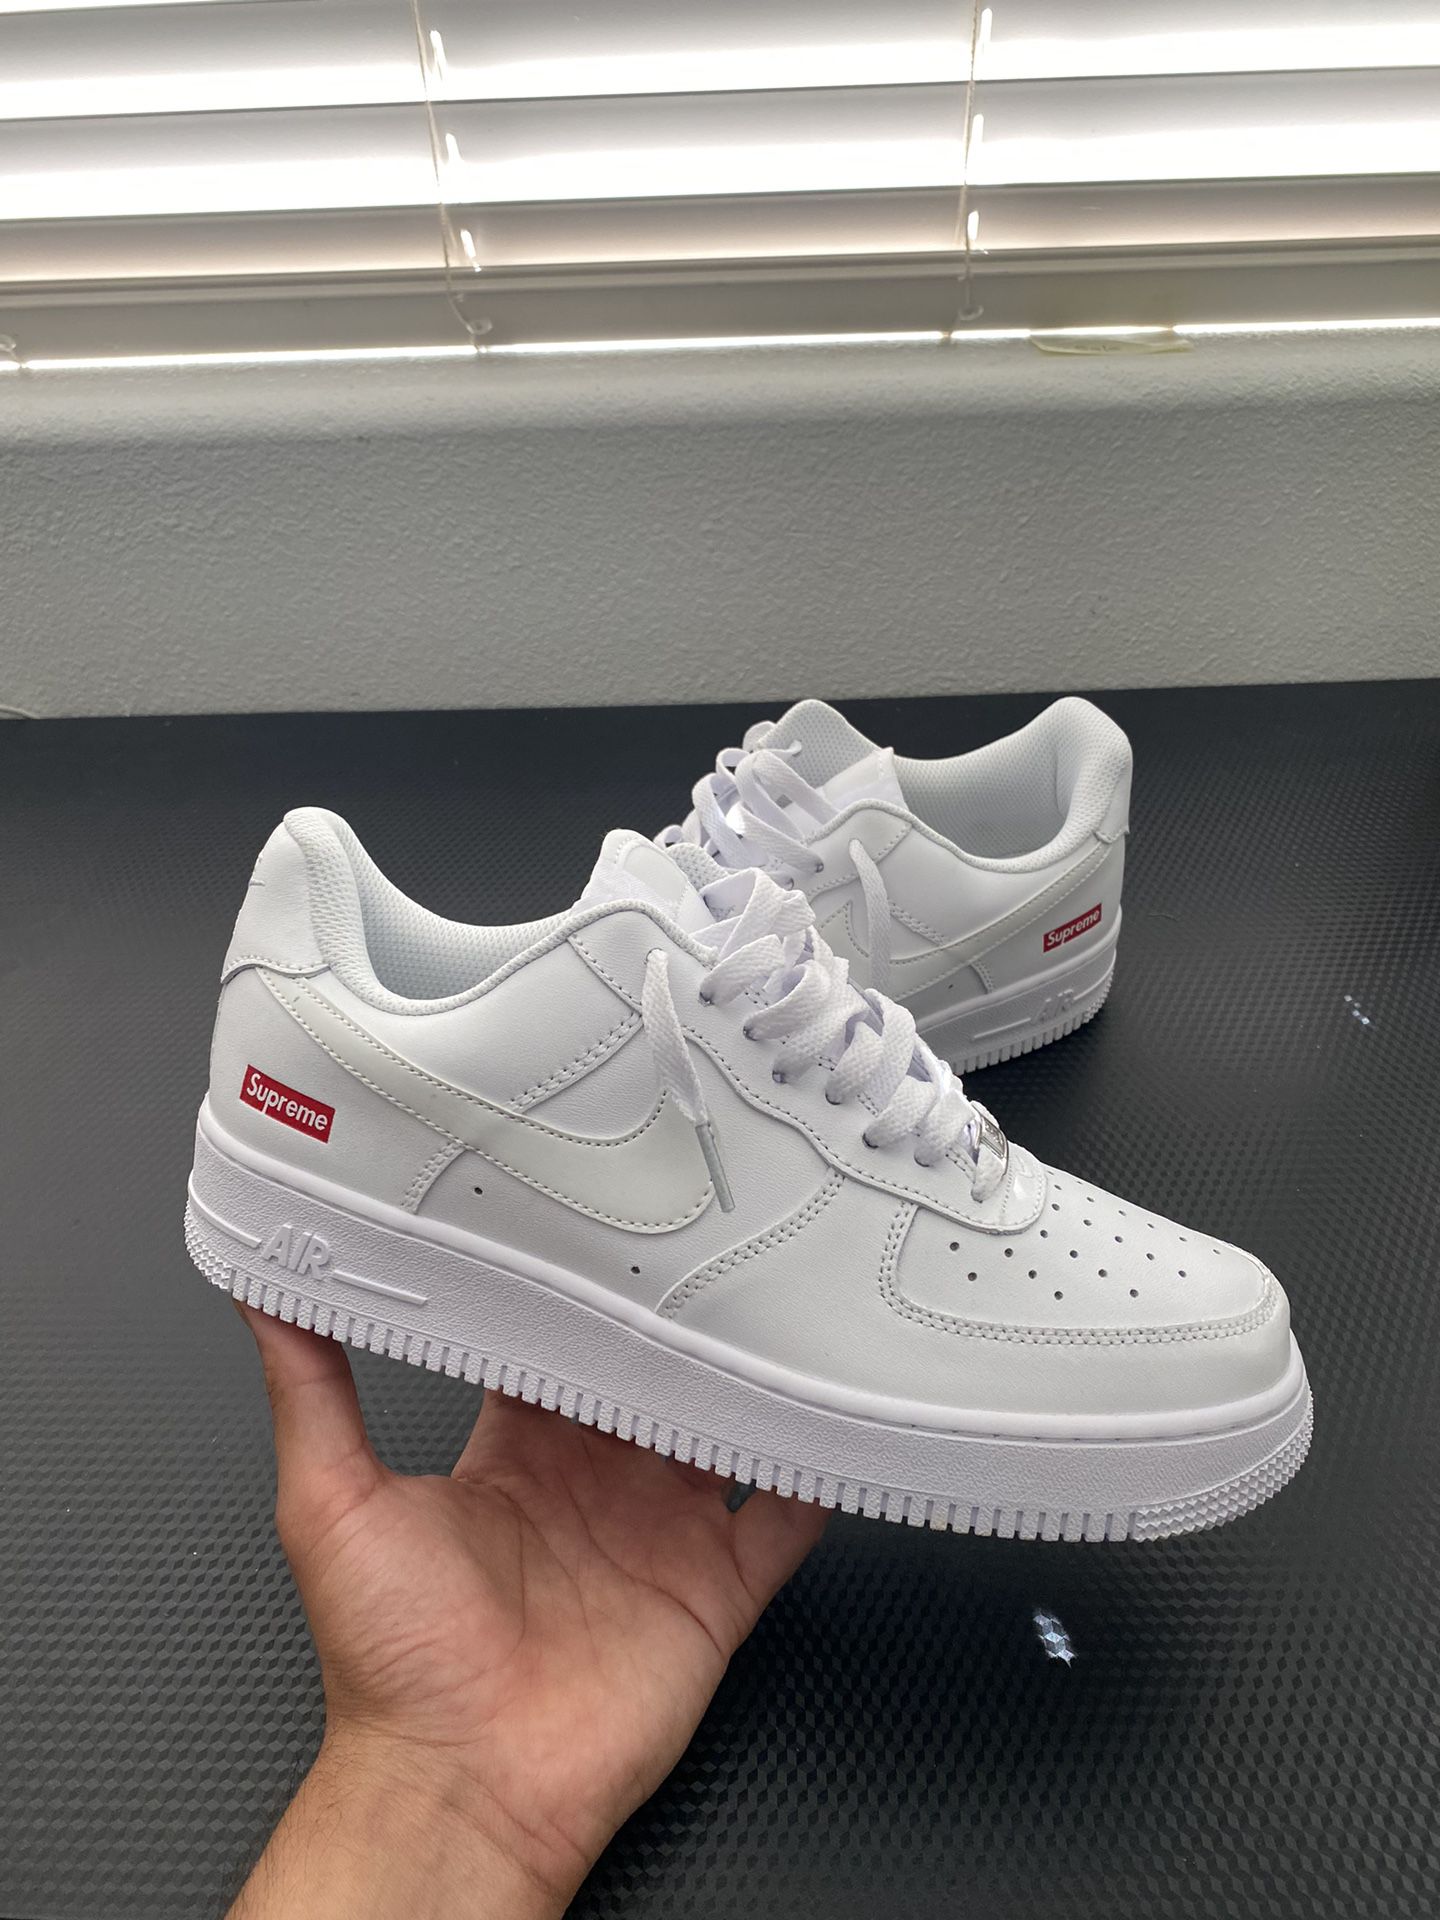 Supreme AirForce 1s